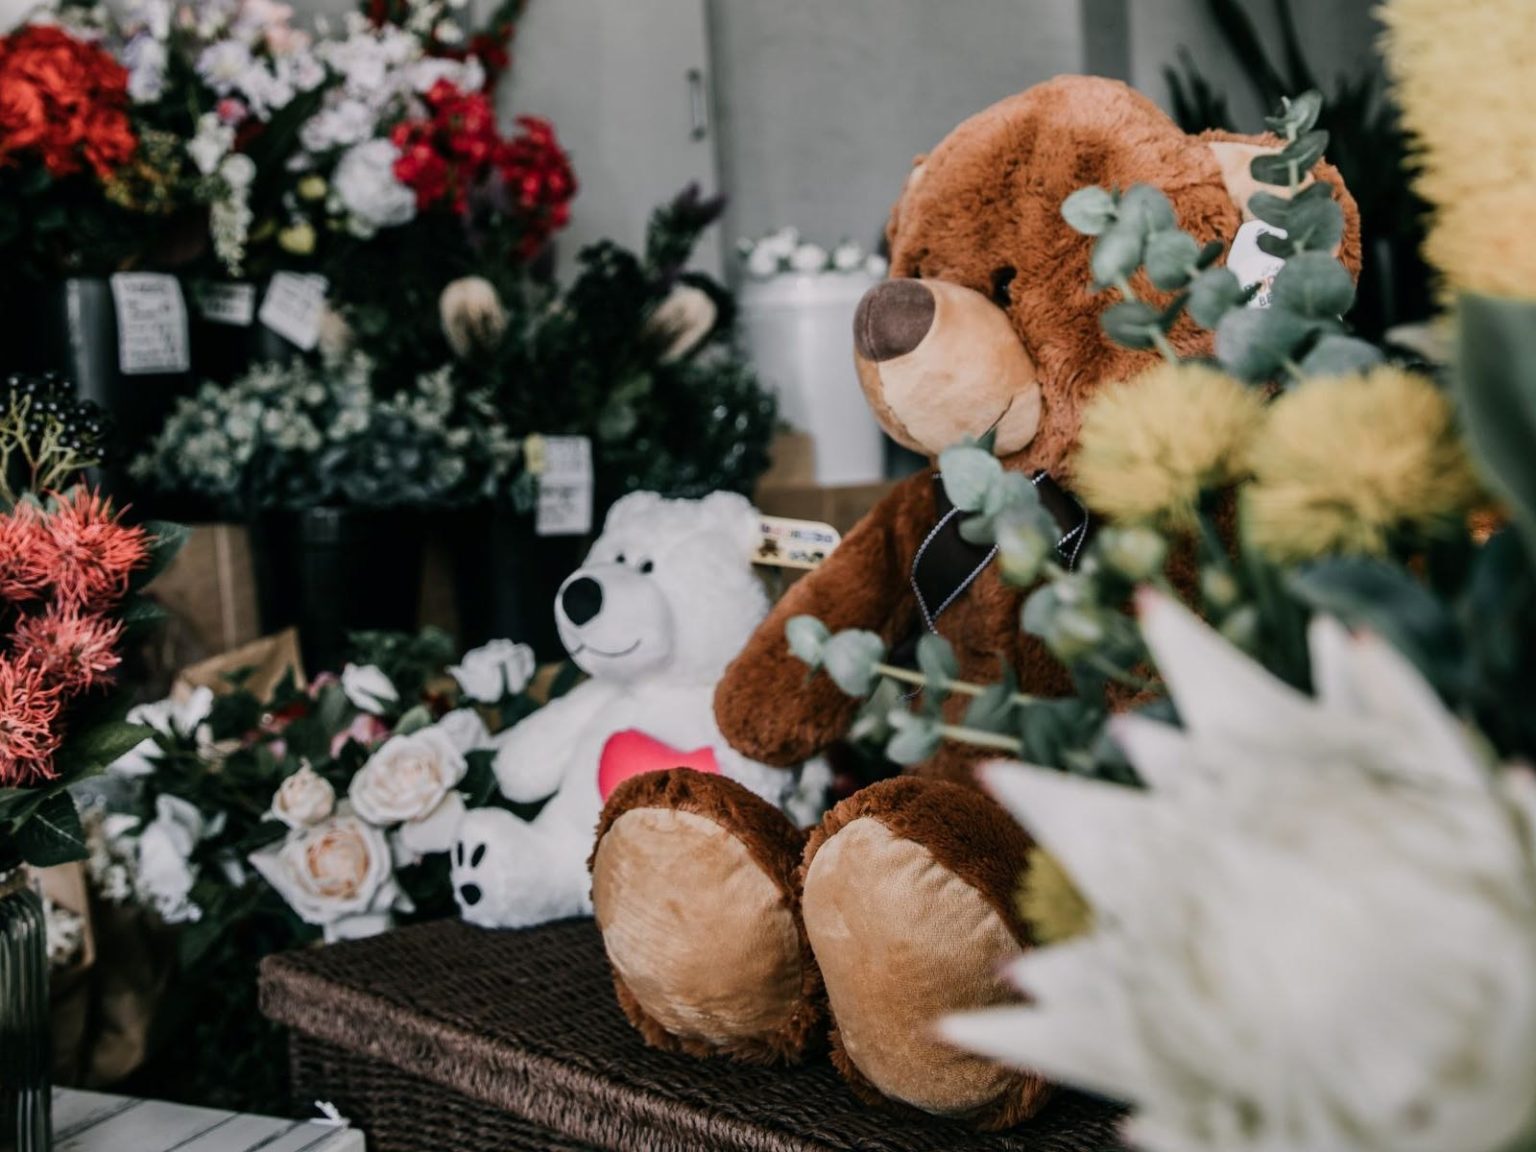 Image of teddy bears and flowers